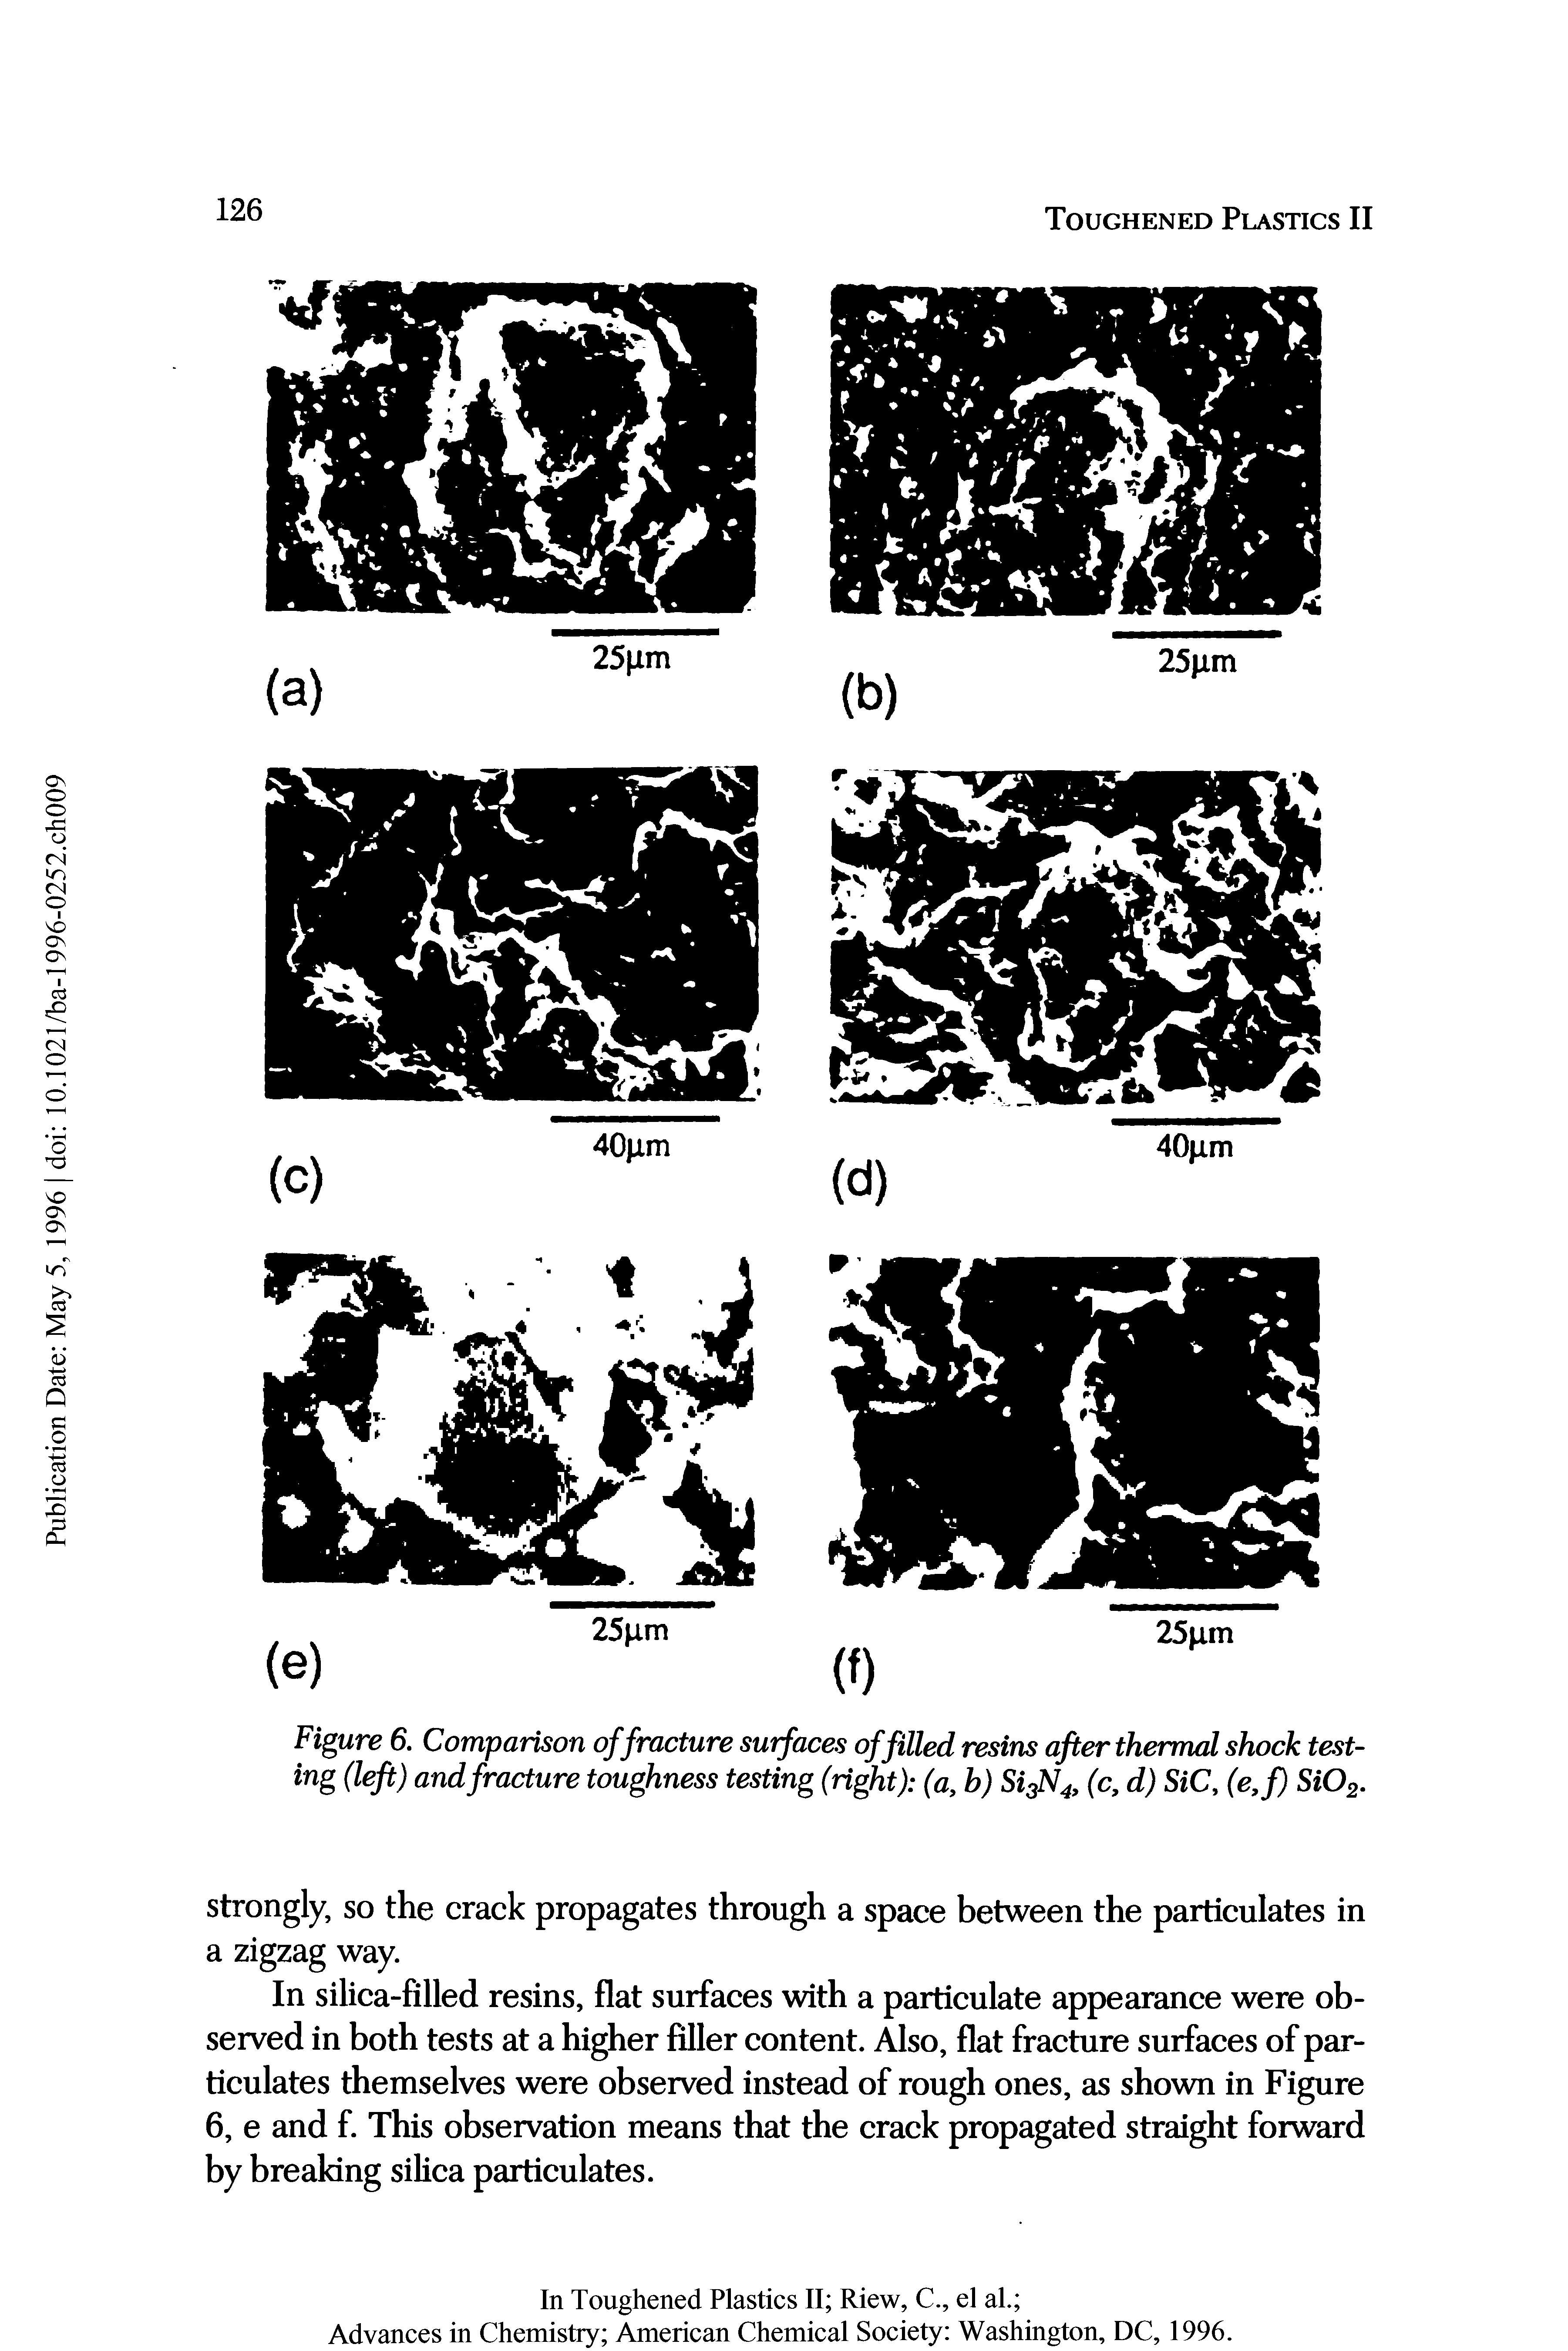 Figure 6. Comparison of fracture surfaces of filled resins after thermal shock testing (left) and fracture toughness testing (right) (a, b) Si3N4, (c, d) SiC, (e,f) Si02.